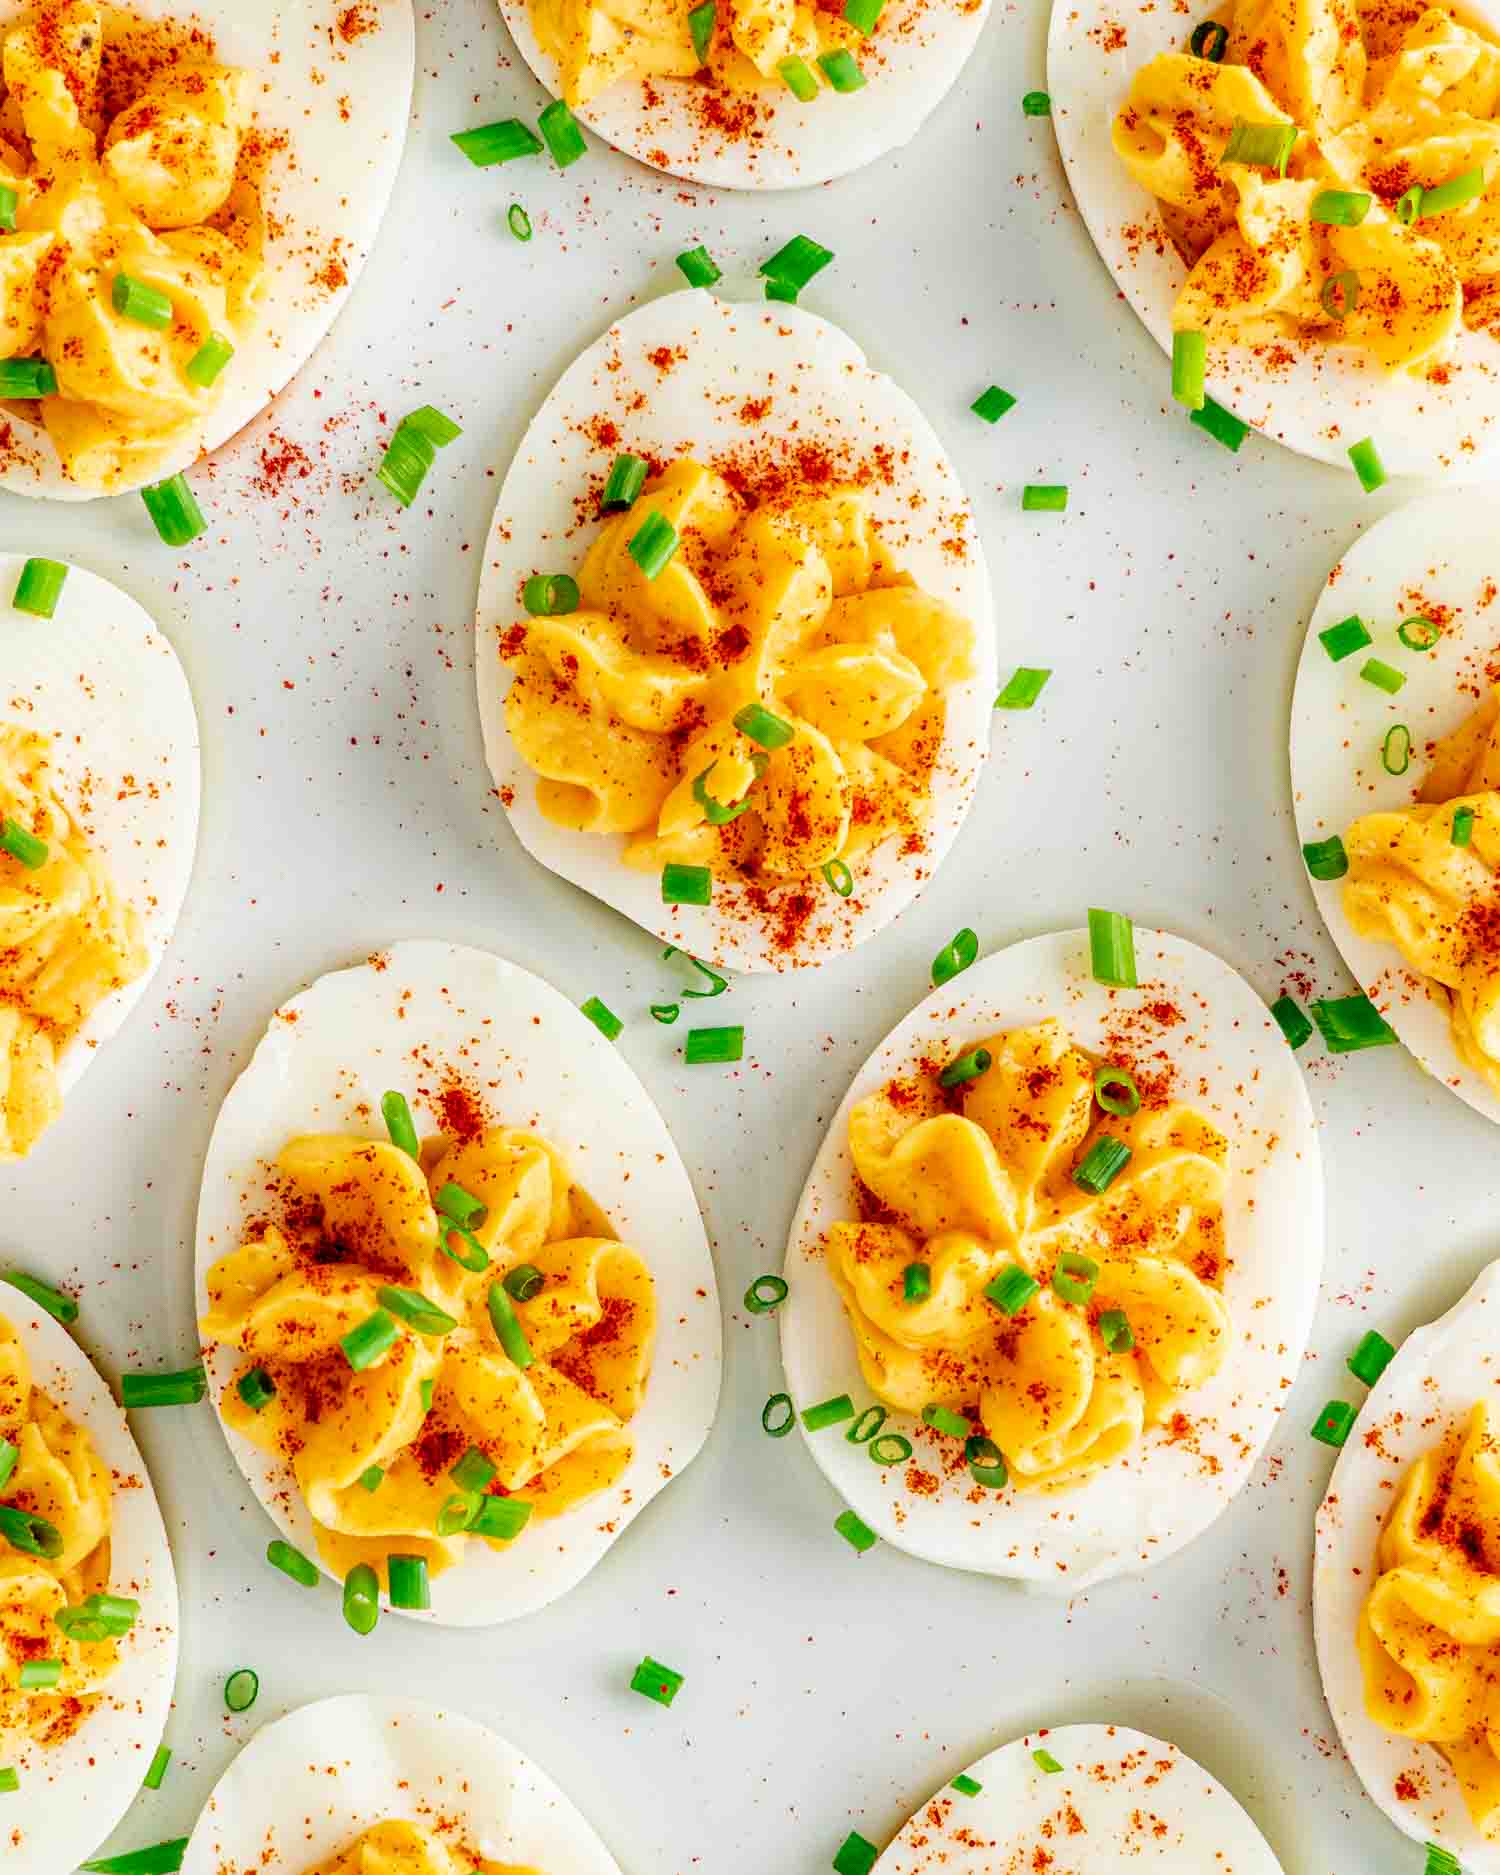 deviled eggs on a serving platter garnished with paprika and chives.